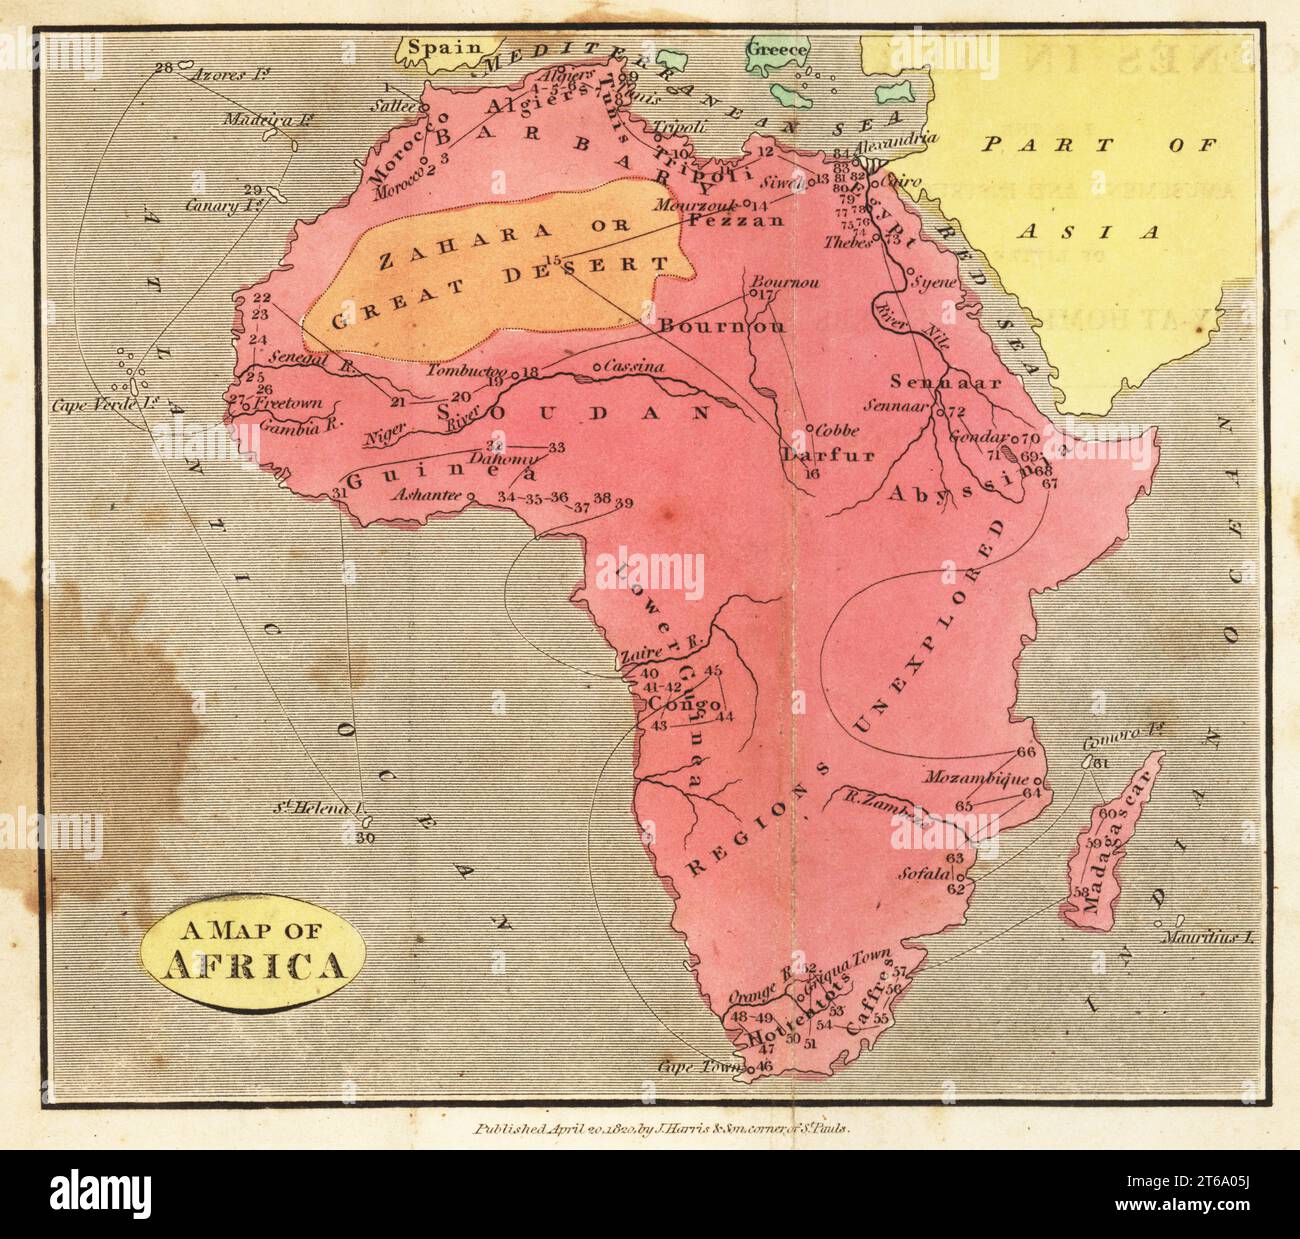 Map of Africa, 1820. Showing Morocco, Barbary and the Sahara in the north, Soudan and Guinea in the west, Khoikhoi (Hottentots) and Bantu (Caffres) in the south, and Abyssinia and Sennaar in the east. Stock Photo